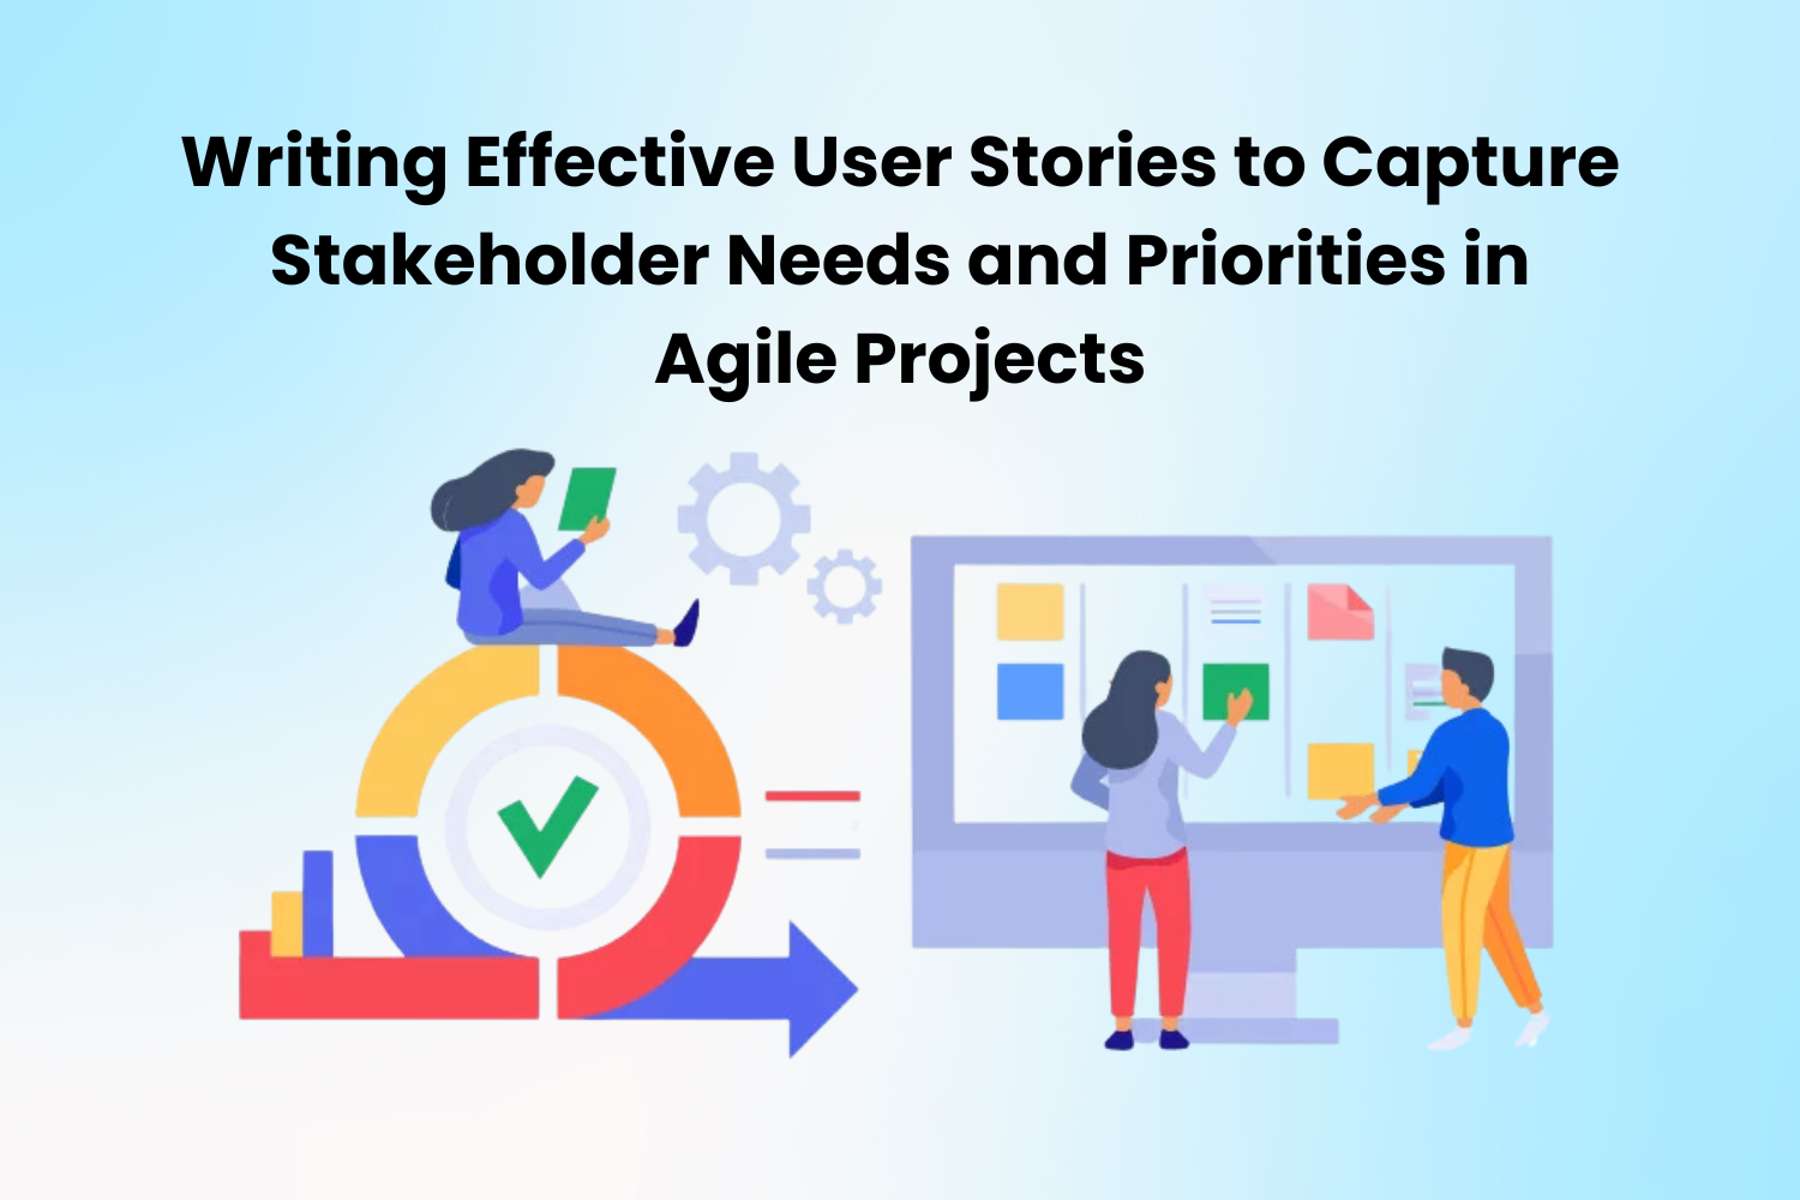 Writing Effective User Stories to Capture Stakeholder Needs and Priorities in Agile Projects